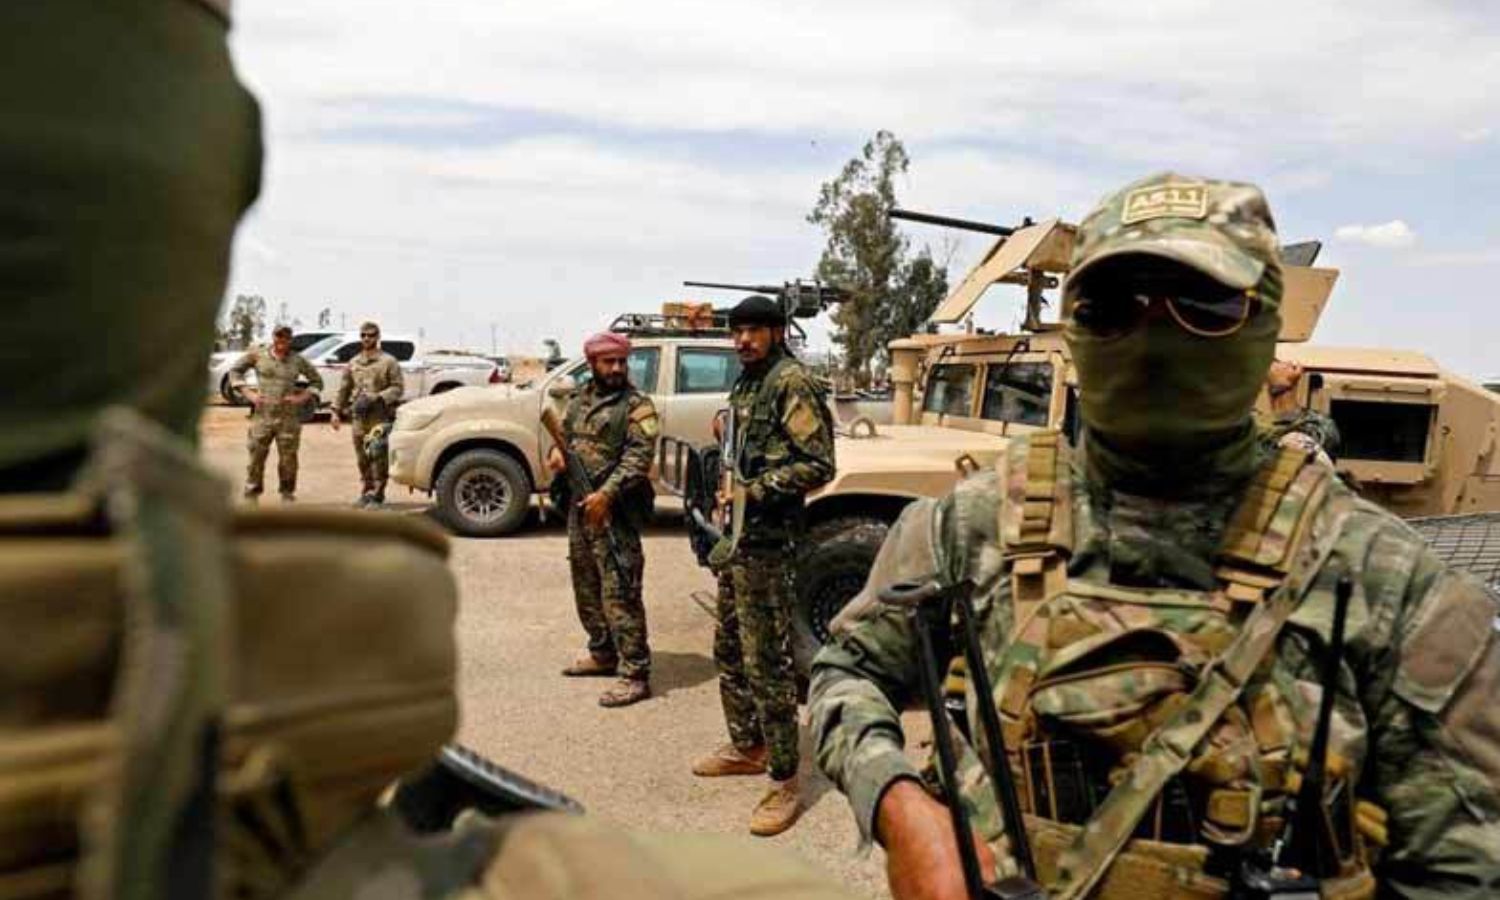 US forces deployed alongside the Kurdish-led Syrian Democratic Forces (SDF) in eastern Euphrates in a mission limited to fighting the Islamic State group - May 1, 2018 (AFP)